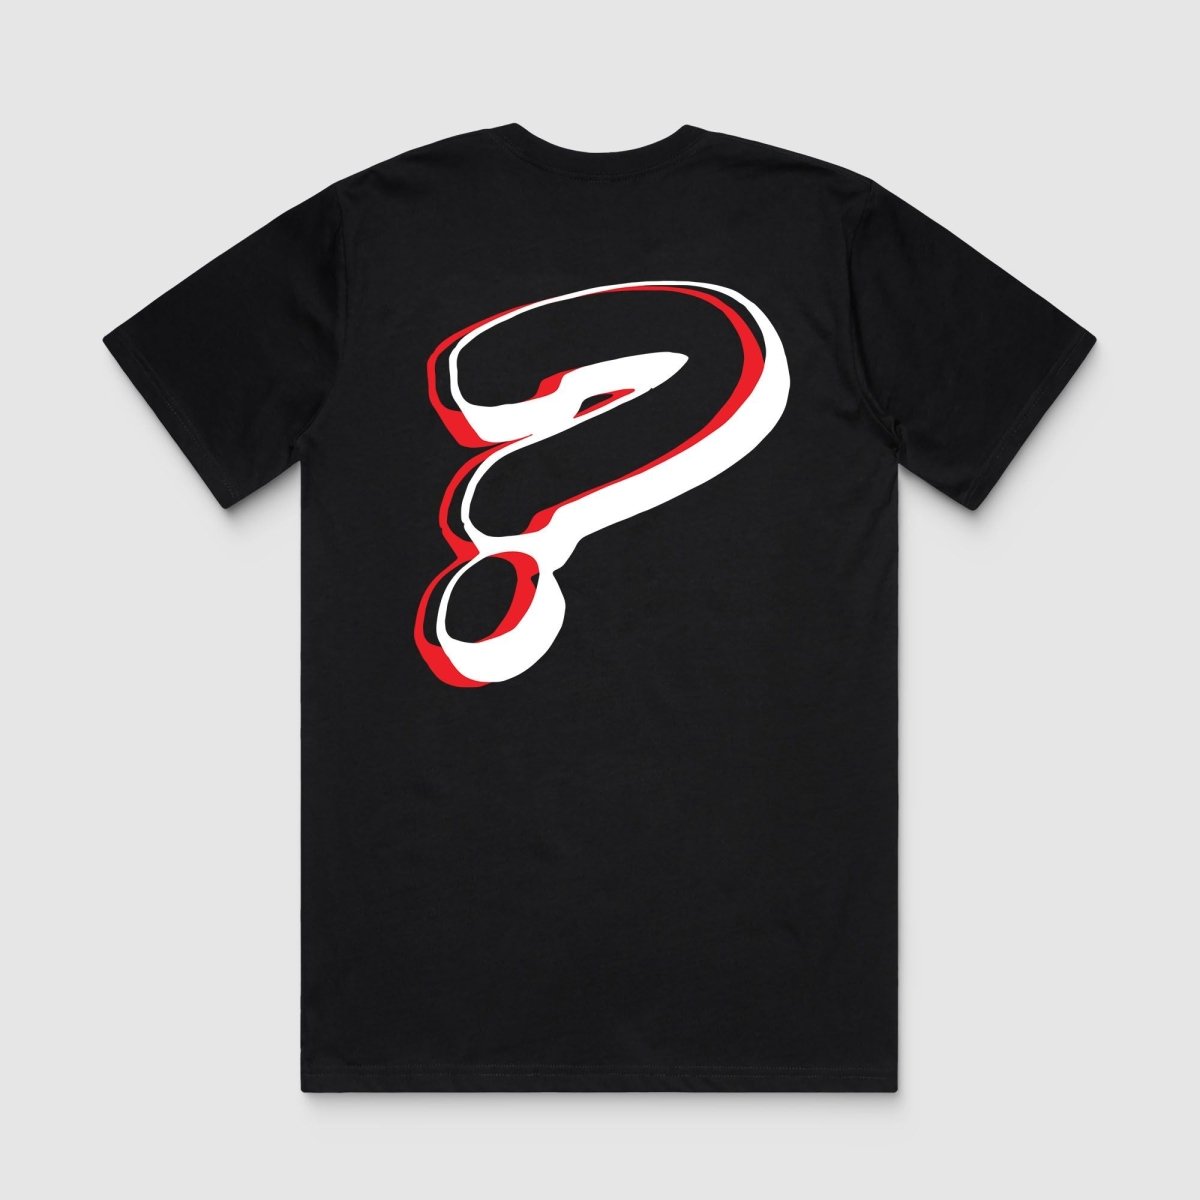 House Industries Question Tee - Autotype